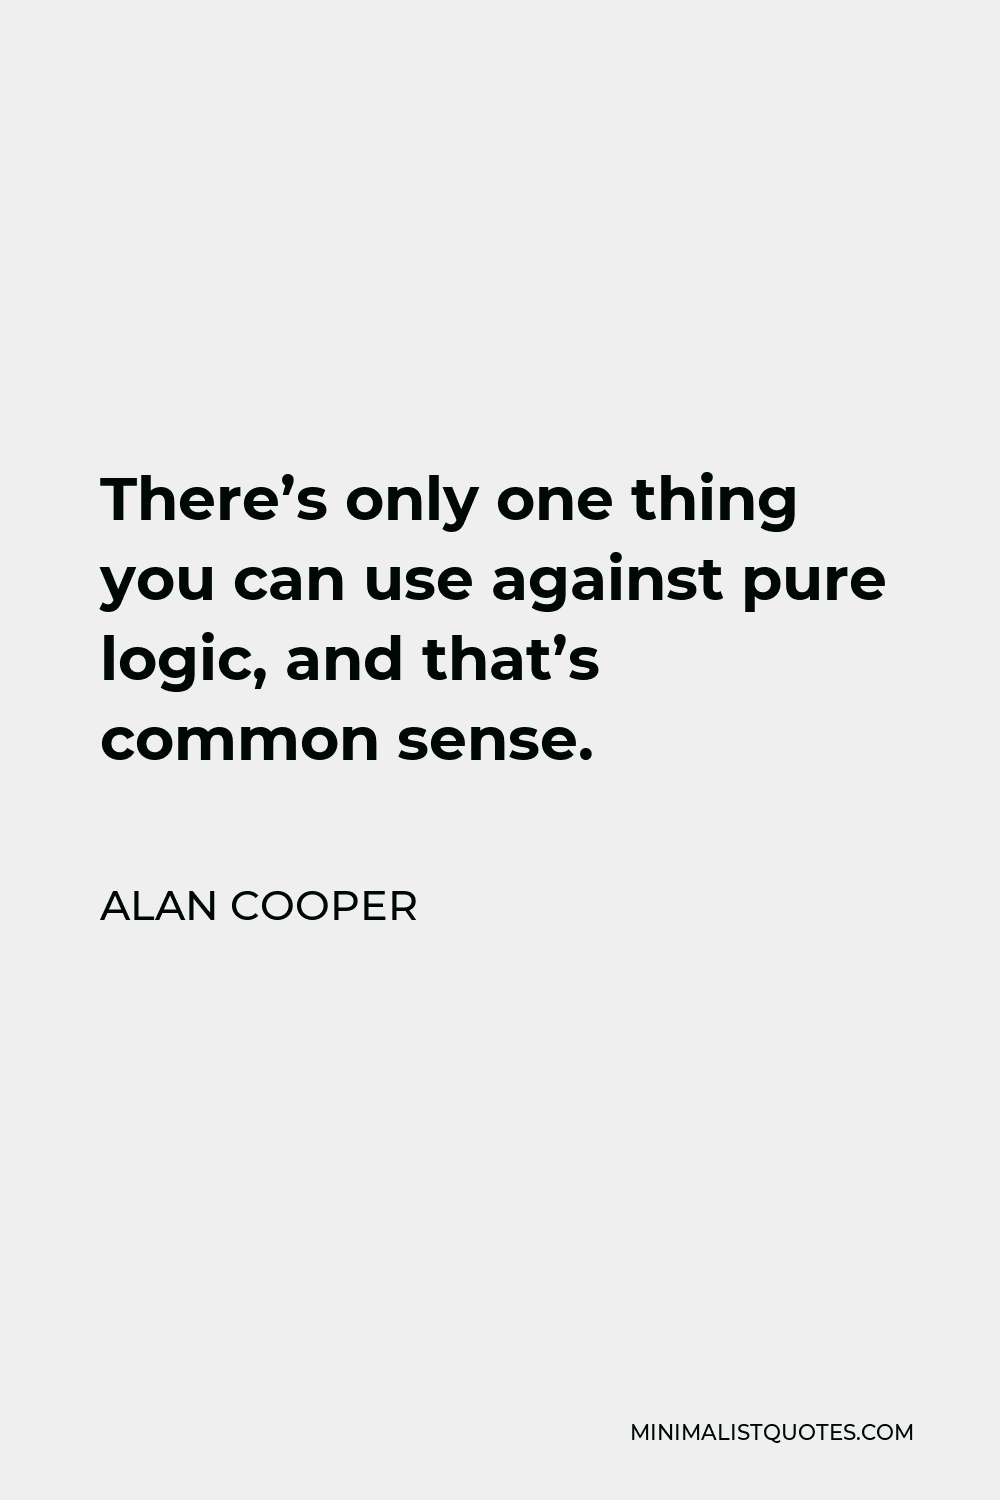 Alan Cooper Quote - There’s only one thing you can use against pure logic, and that’s common sense.